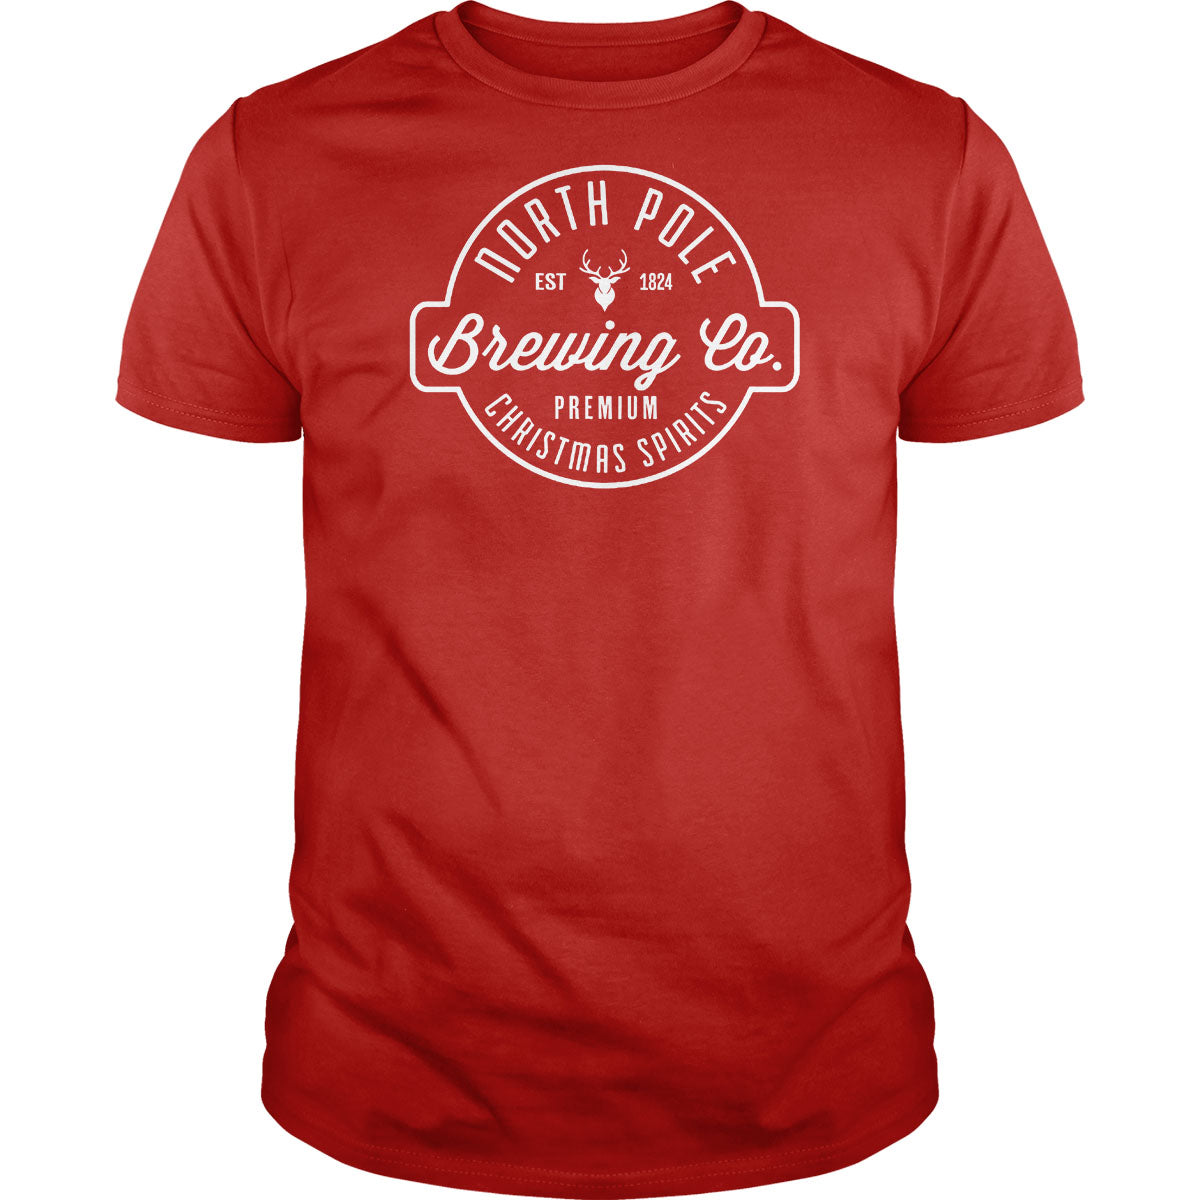 North Pole Brewing Co. - BustedTees.com